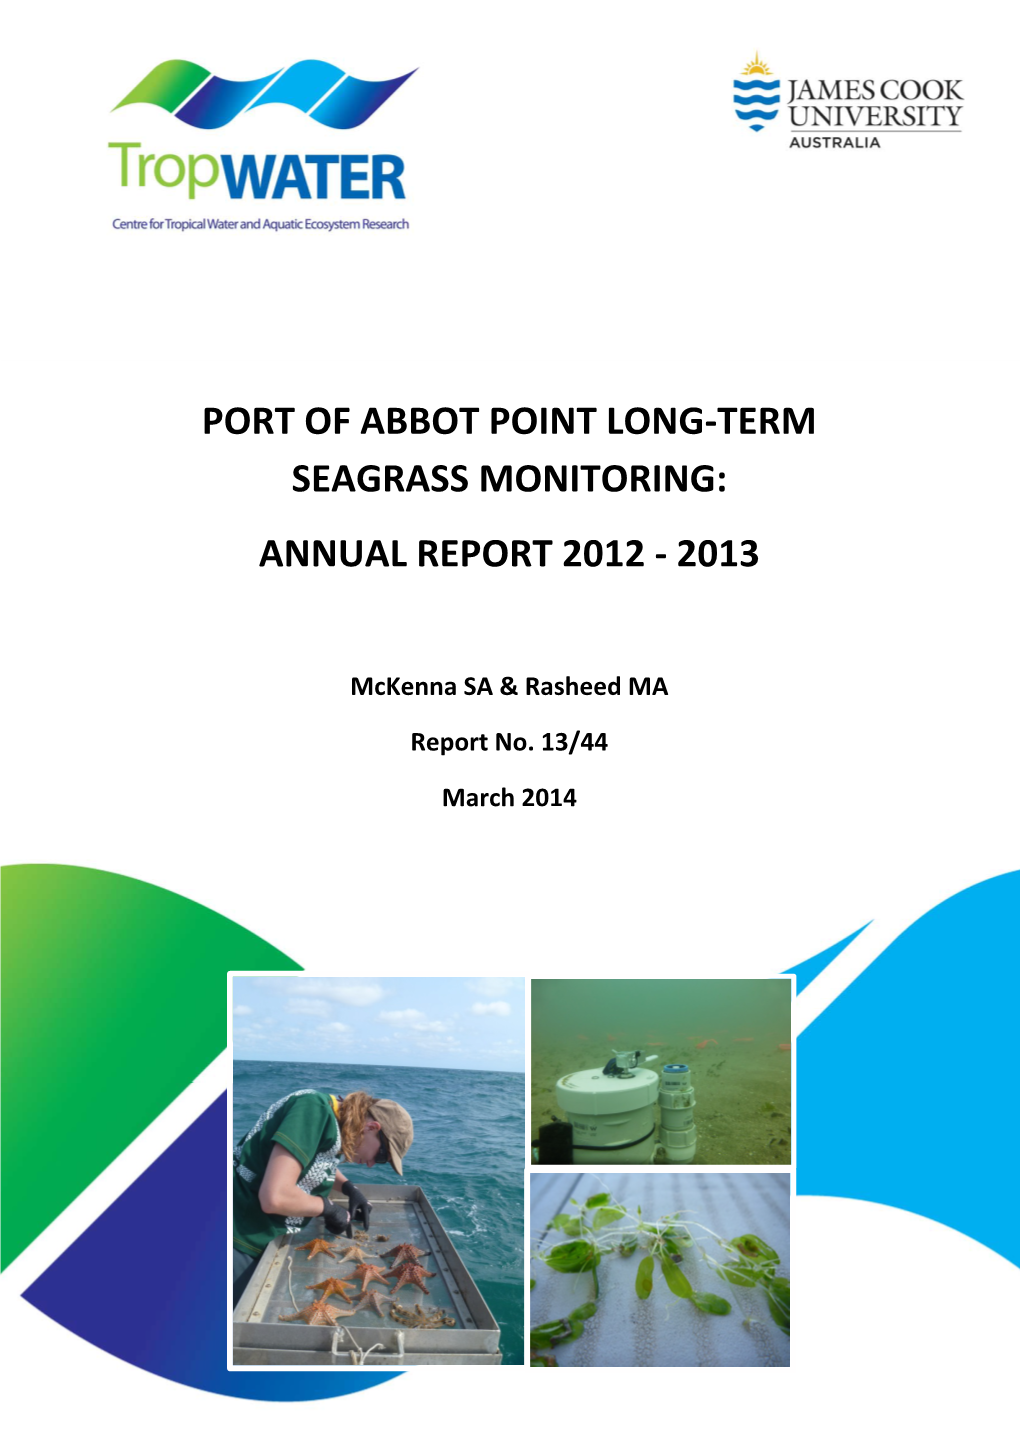 Port of Abbot Point Long-Term Seagrass Monitoring: Annual Report 2012 - 2013